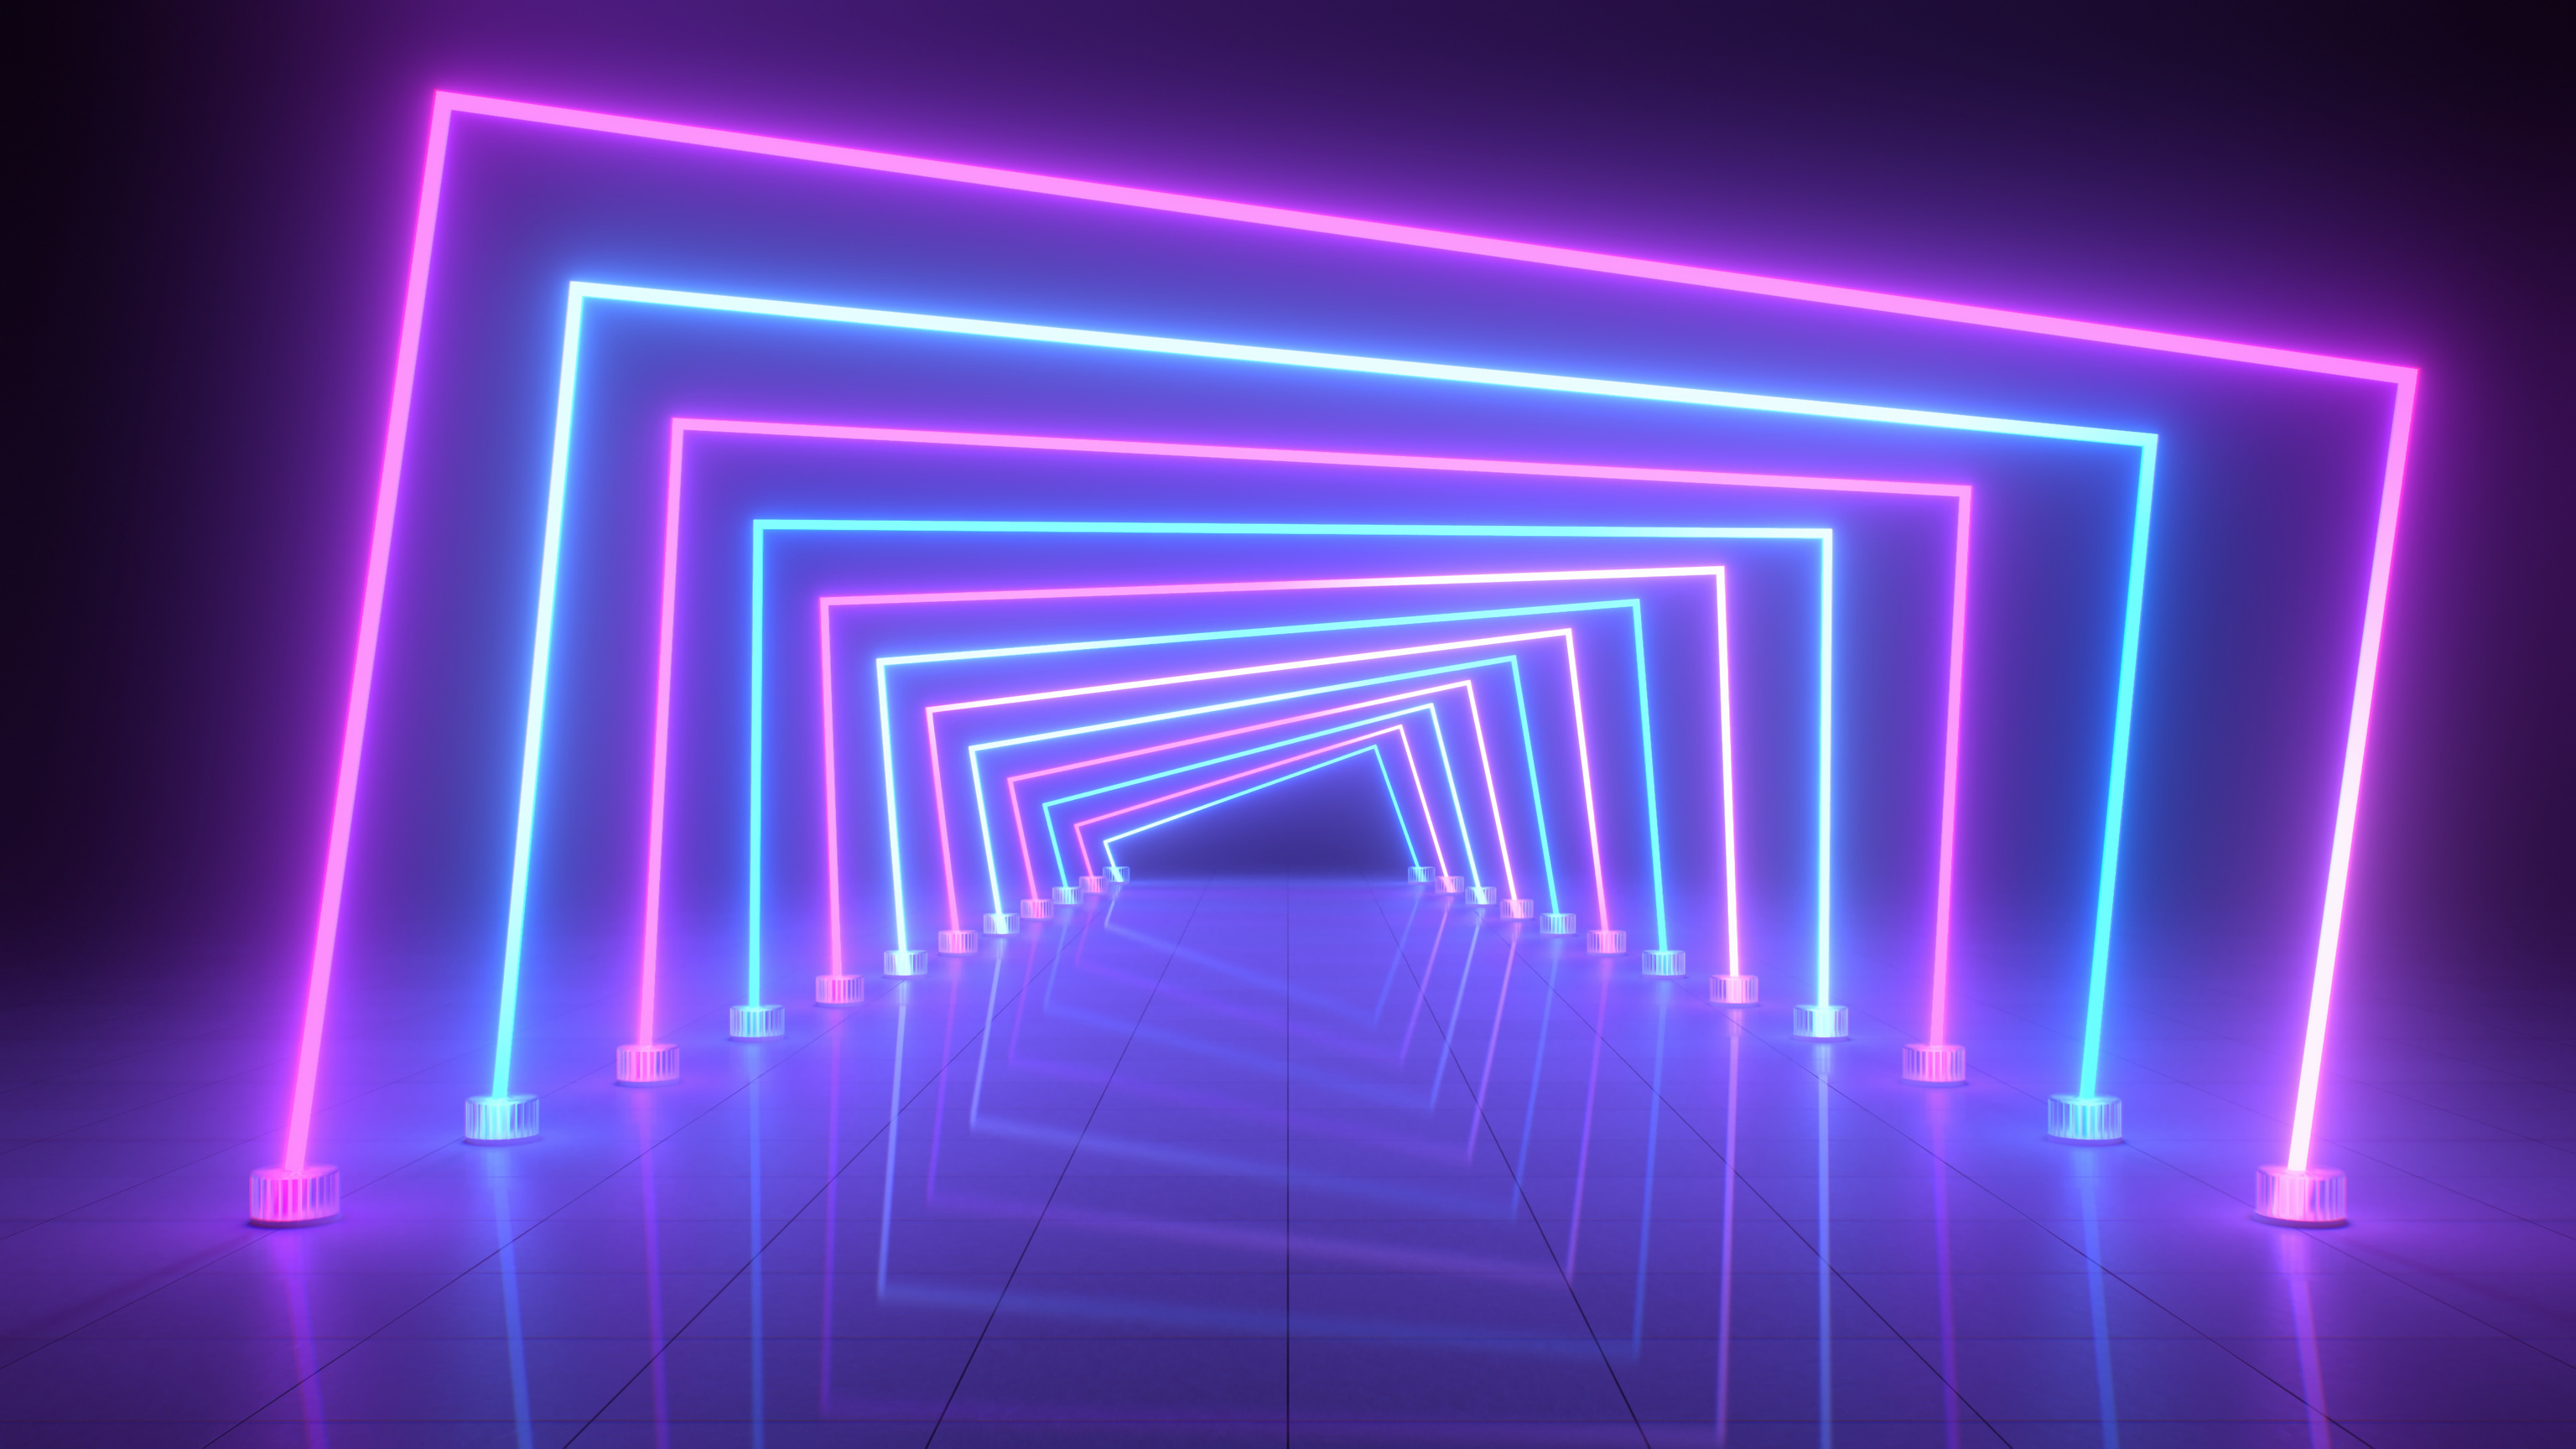 Ultraviolet Abstract Neon Light Tunnel Squares Glow with Reflections - Abstract Background Texture